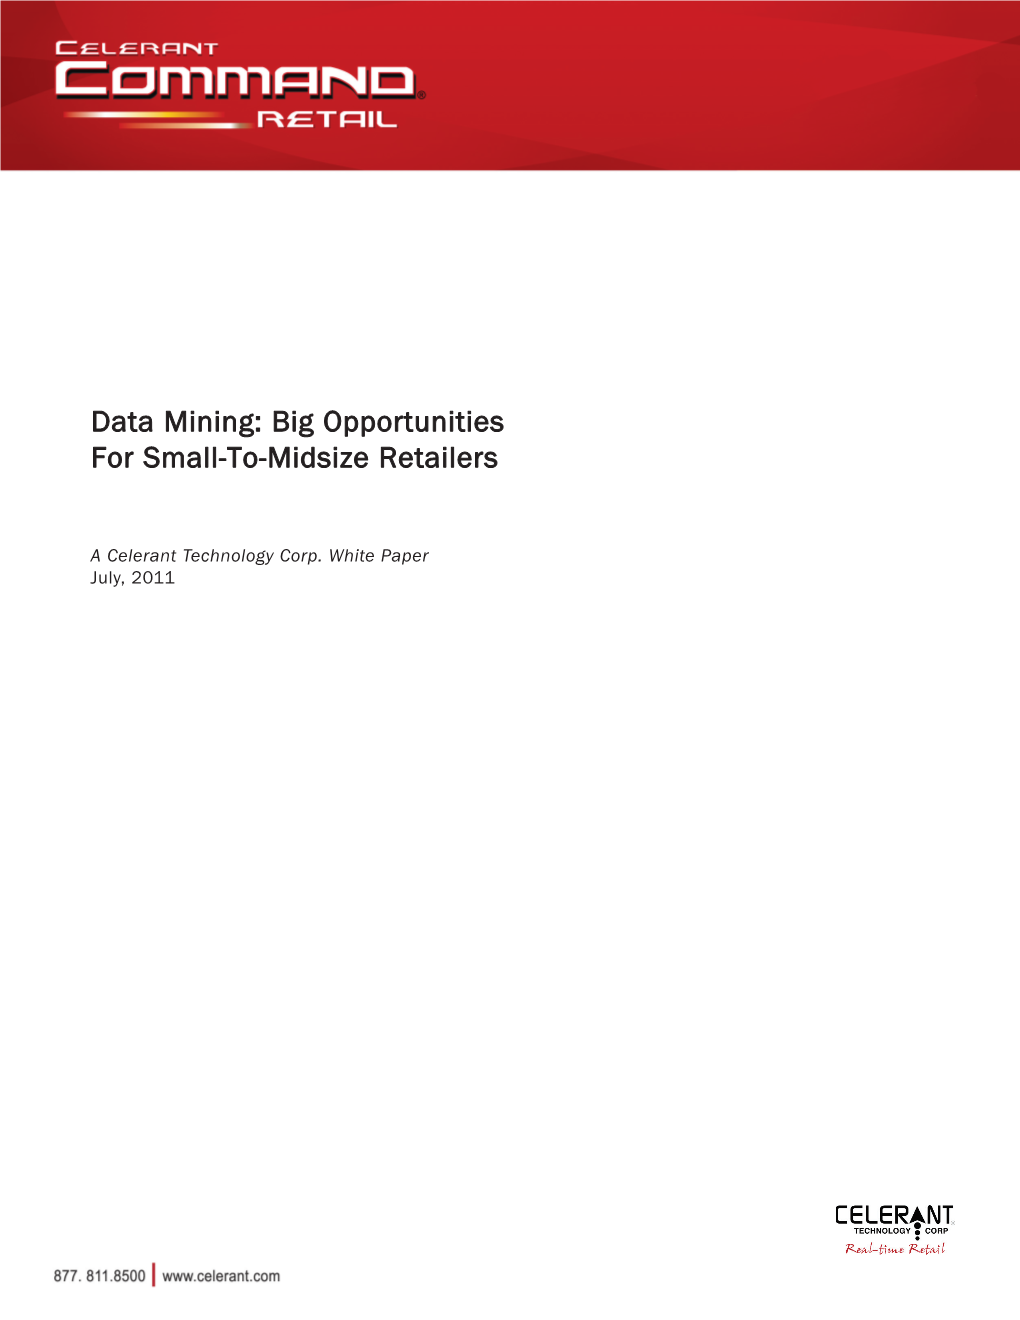 Data Mining: Big Opportunities for Small-To-Midsize Retailers